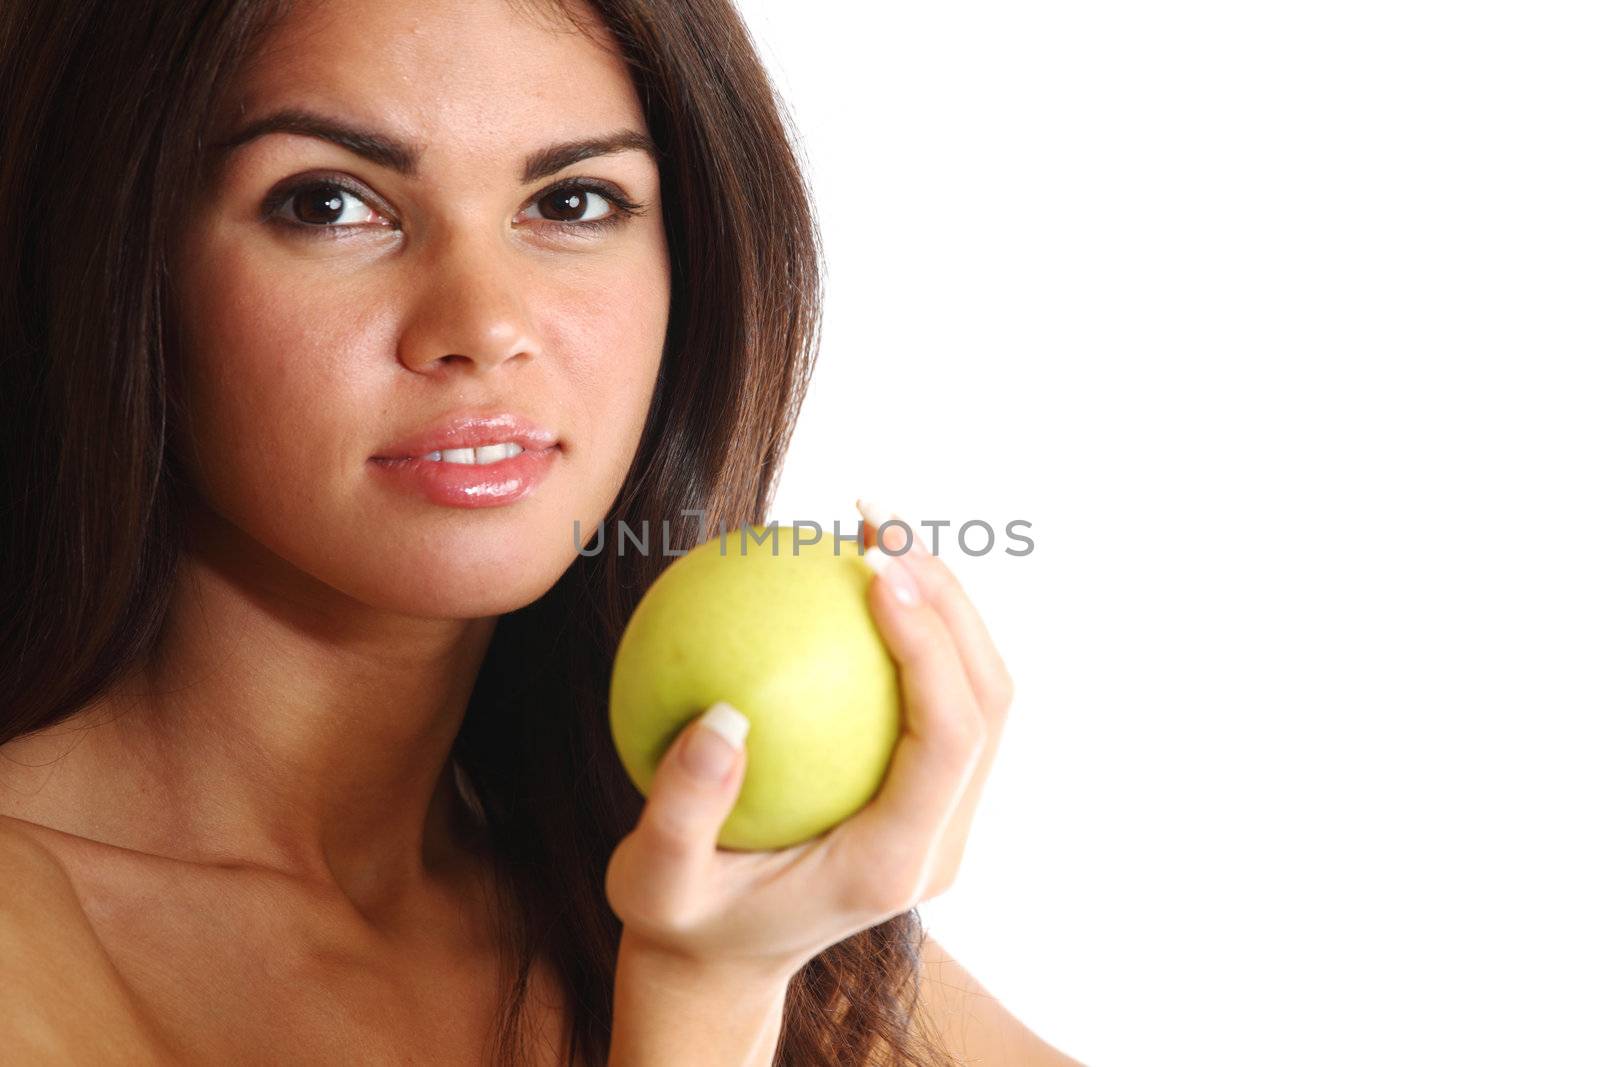 woman hold apple in hands isolated on white